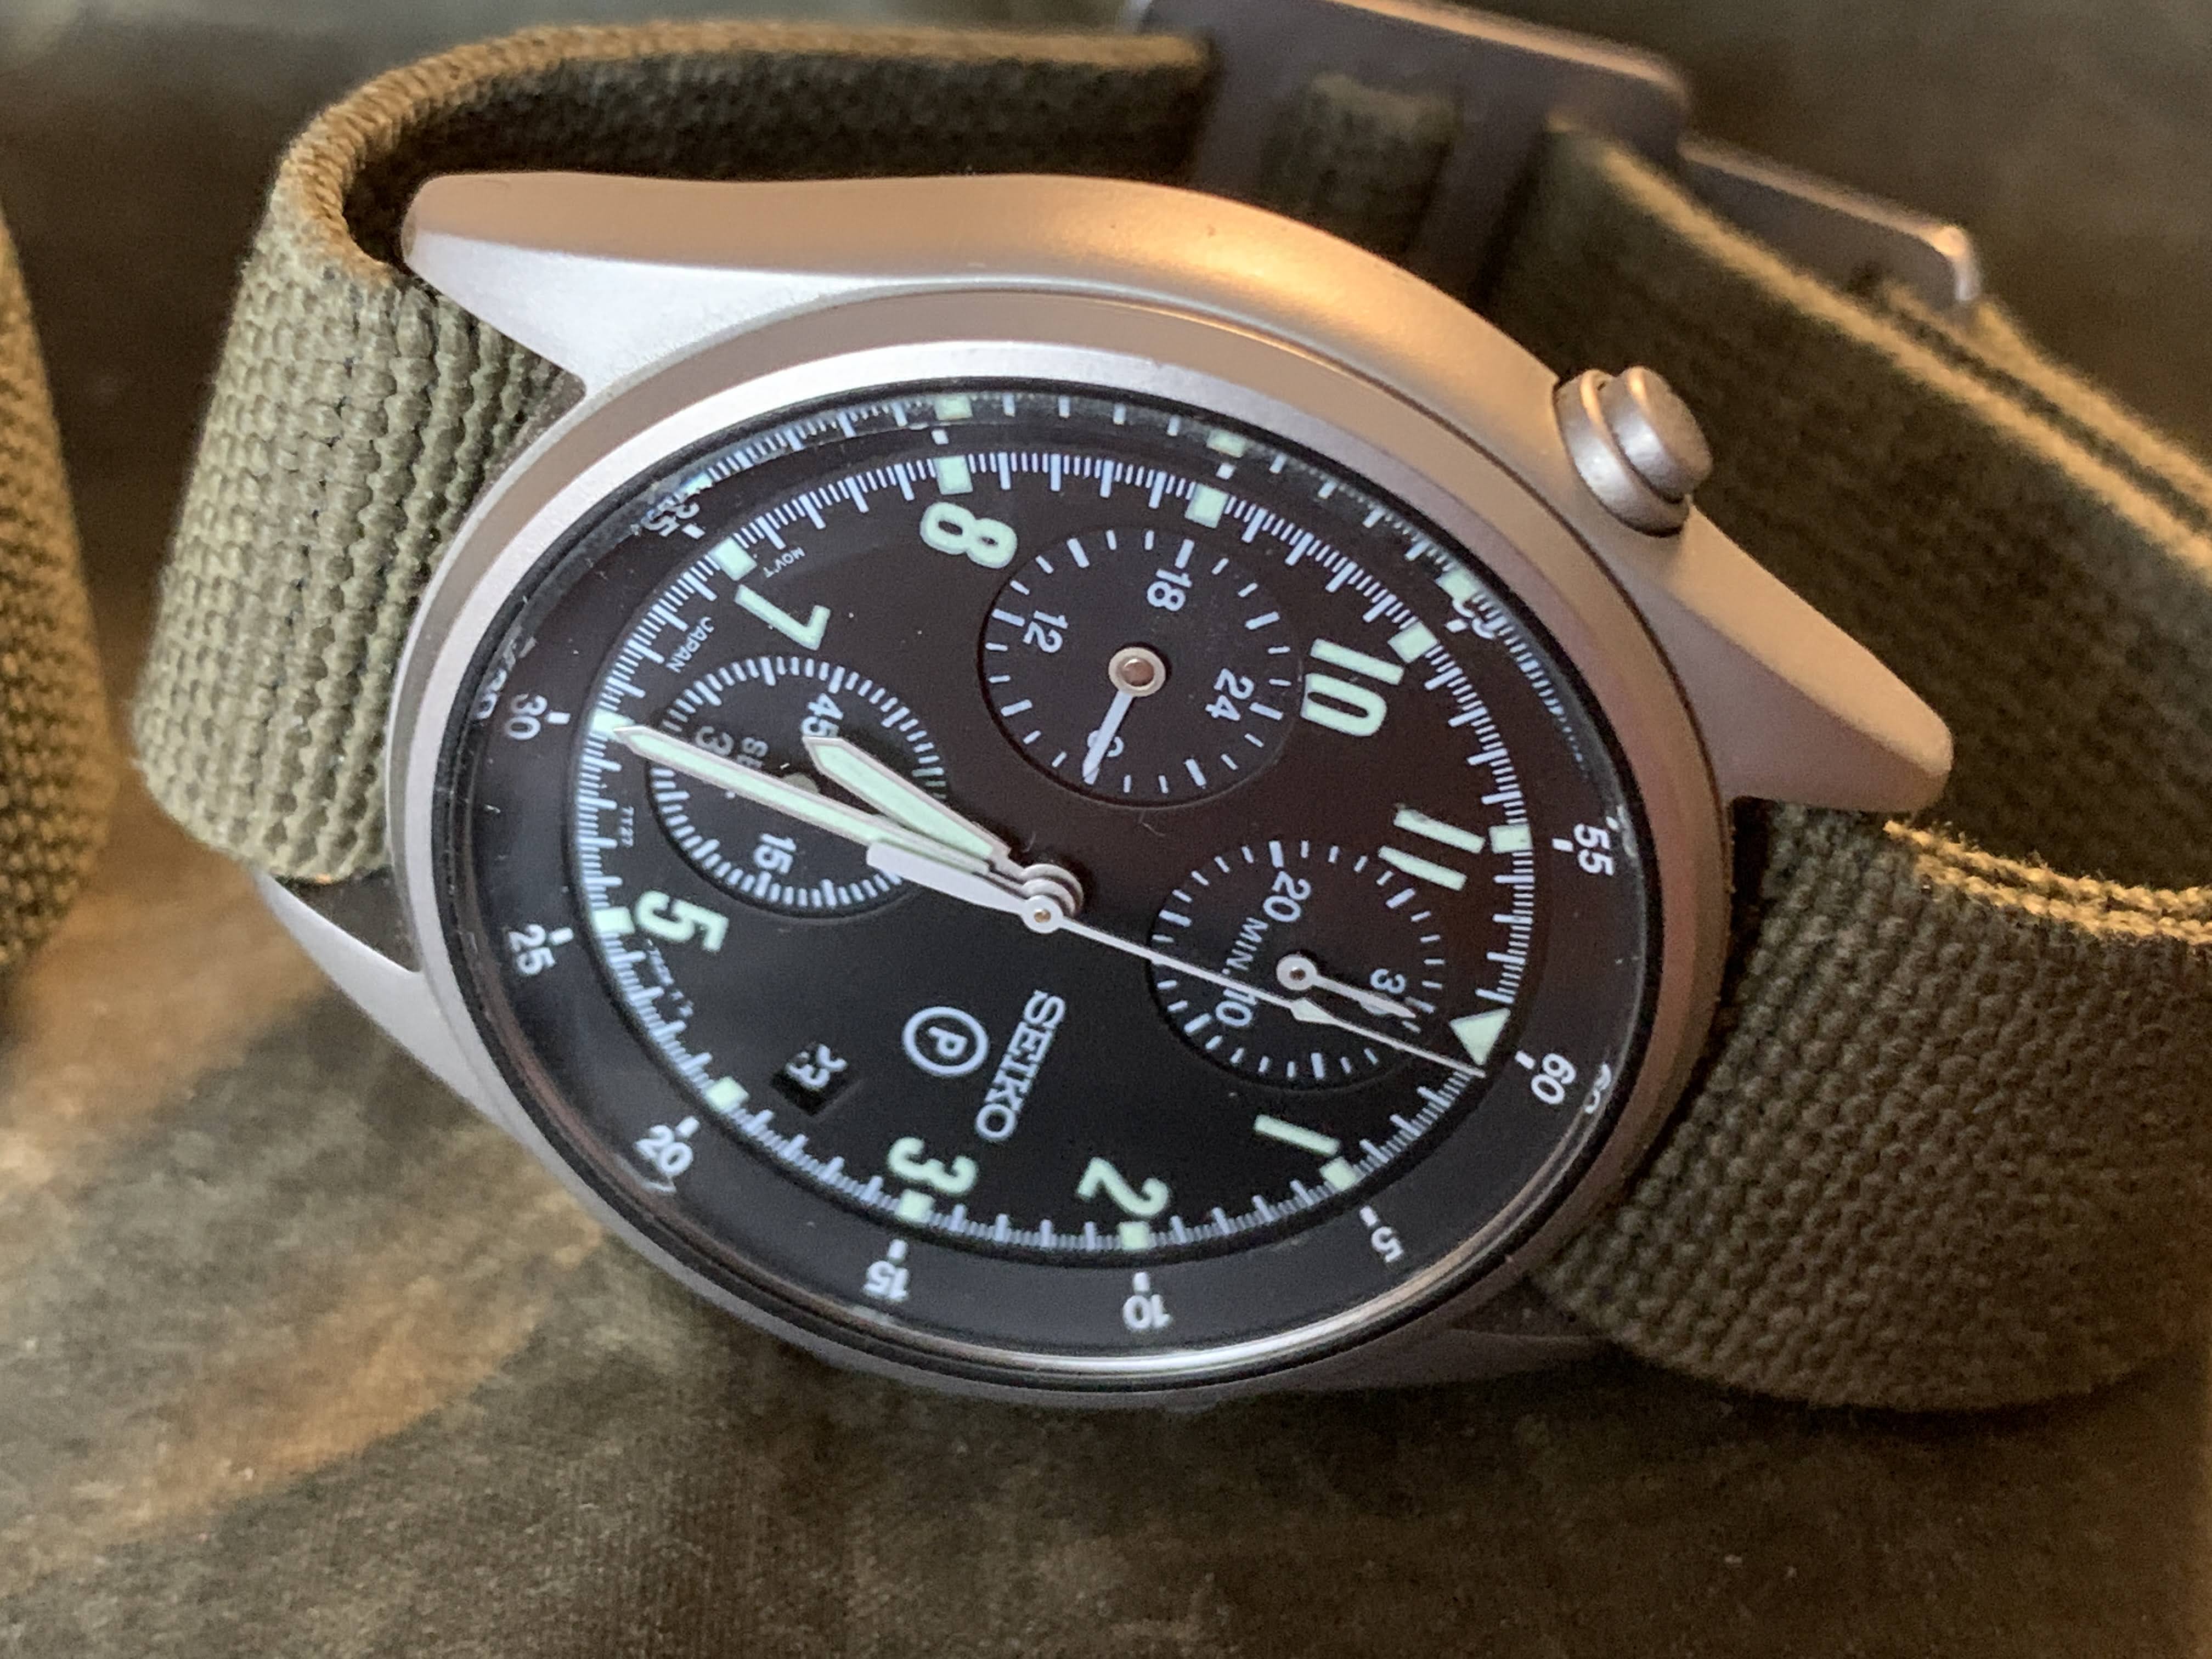 Harry's Vintage Seiko Blog: Seiko Gen 2 7T27-7A20 1995 British Royal  Airforce (RAF) Military Issued chronograph